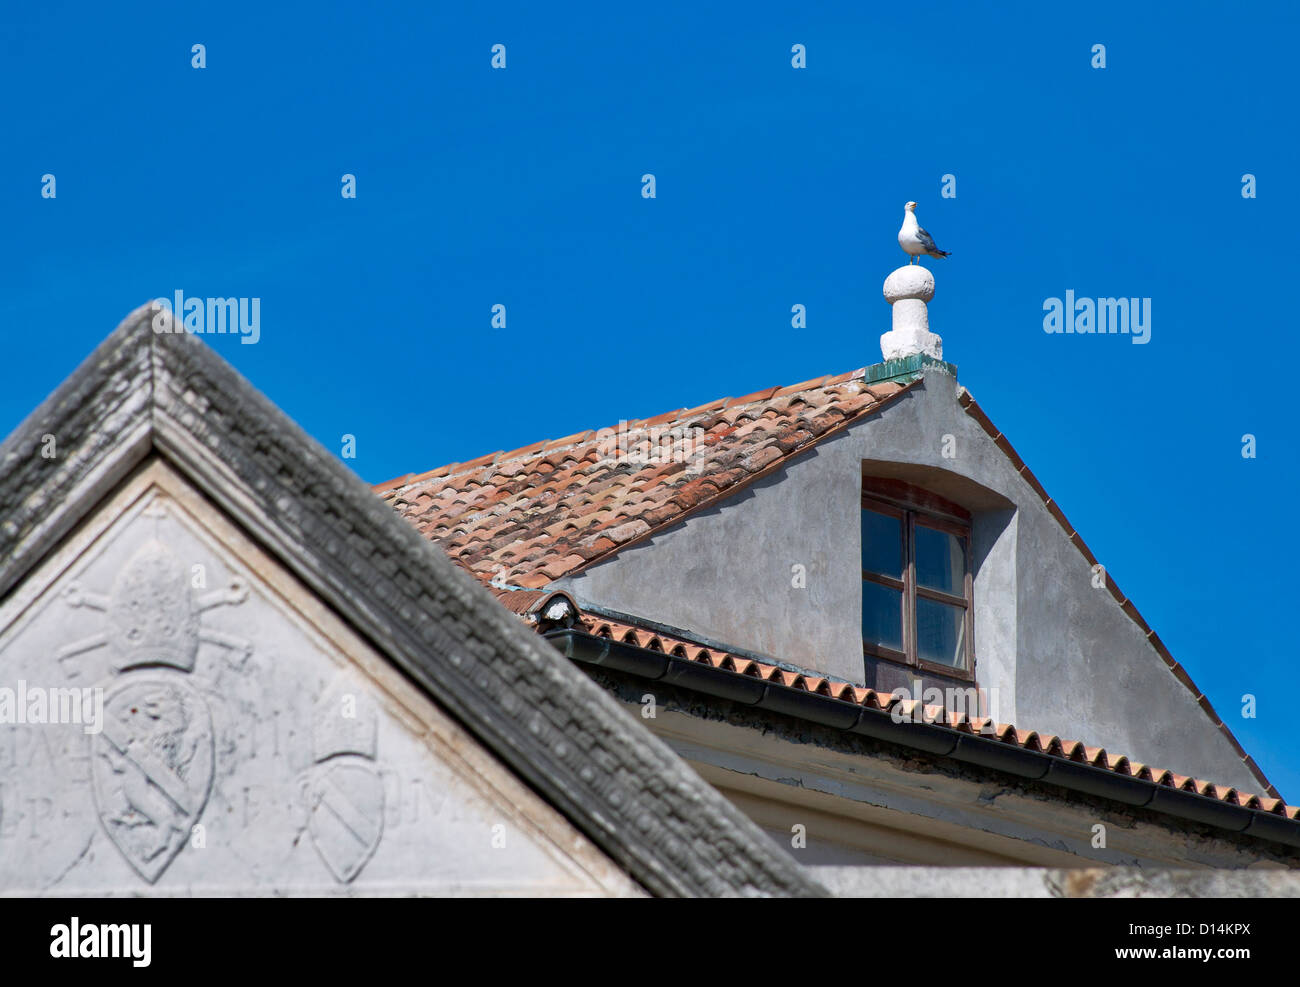 Ancient tiled roofs and seagull. Lisbon, Portugal. Stock Photo